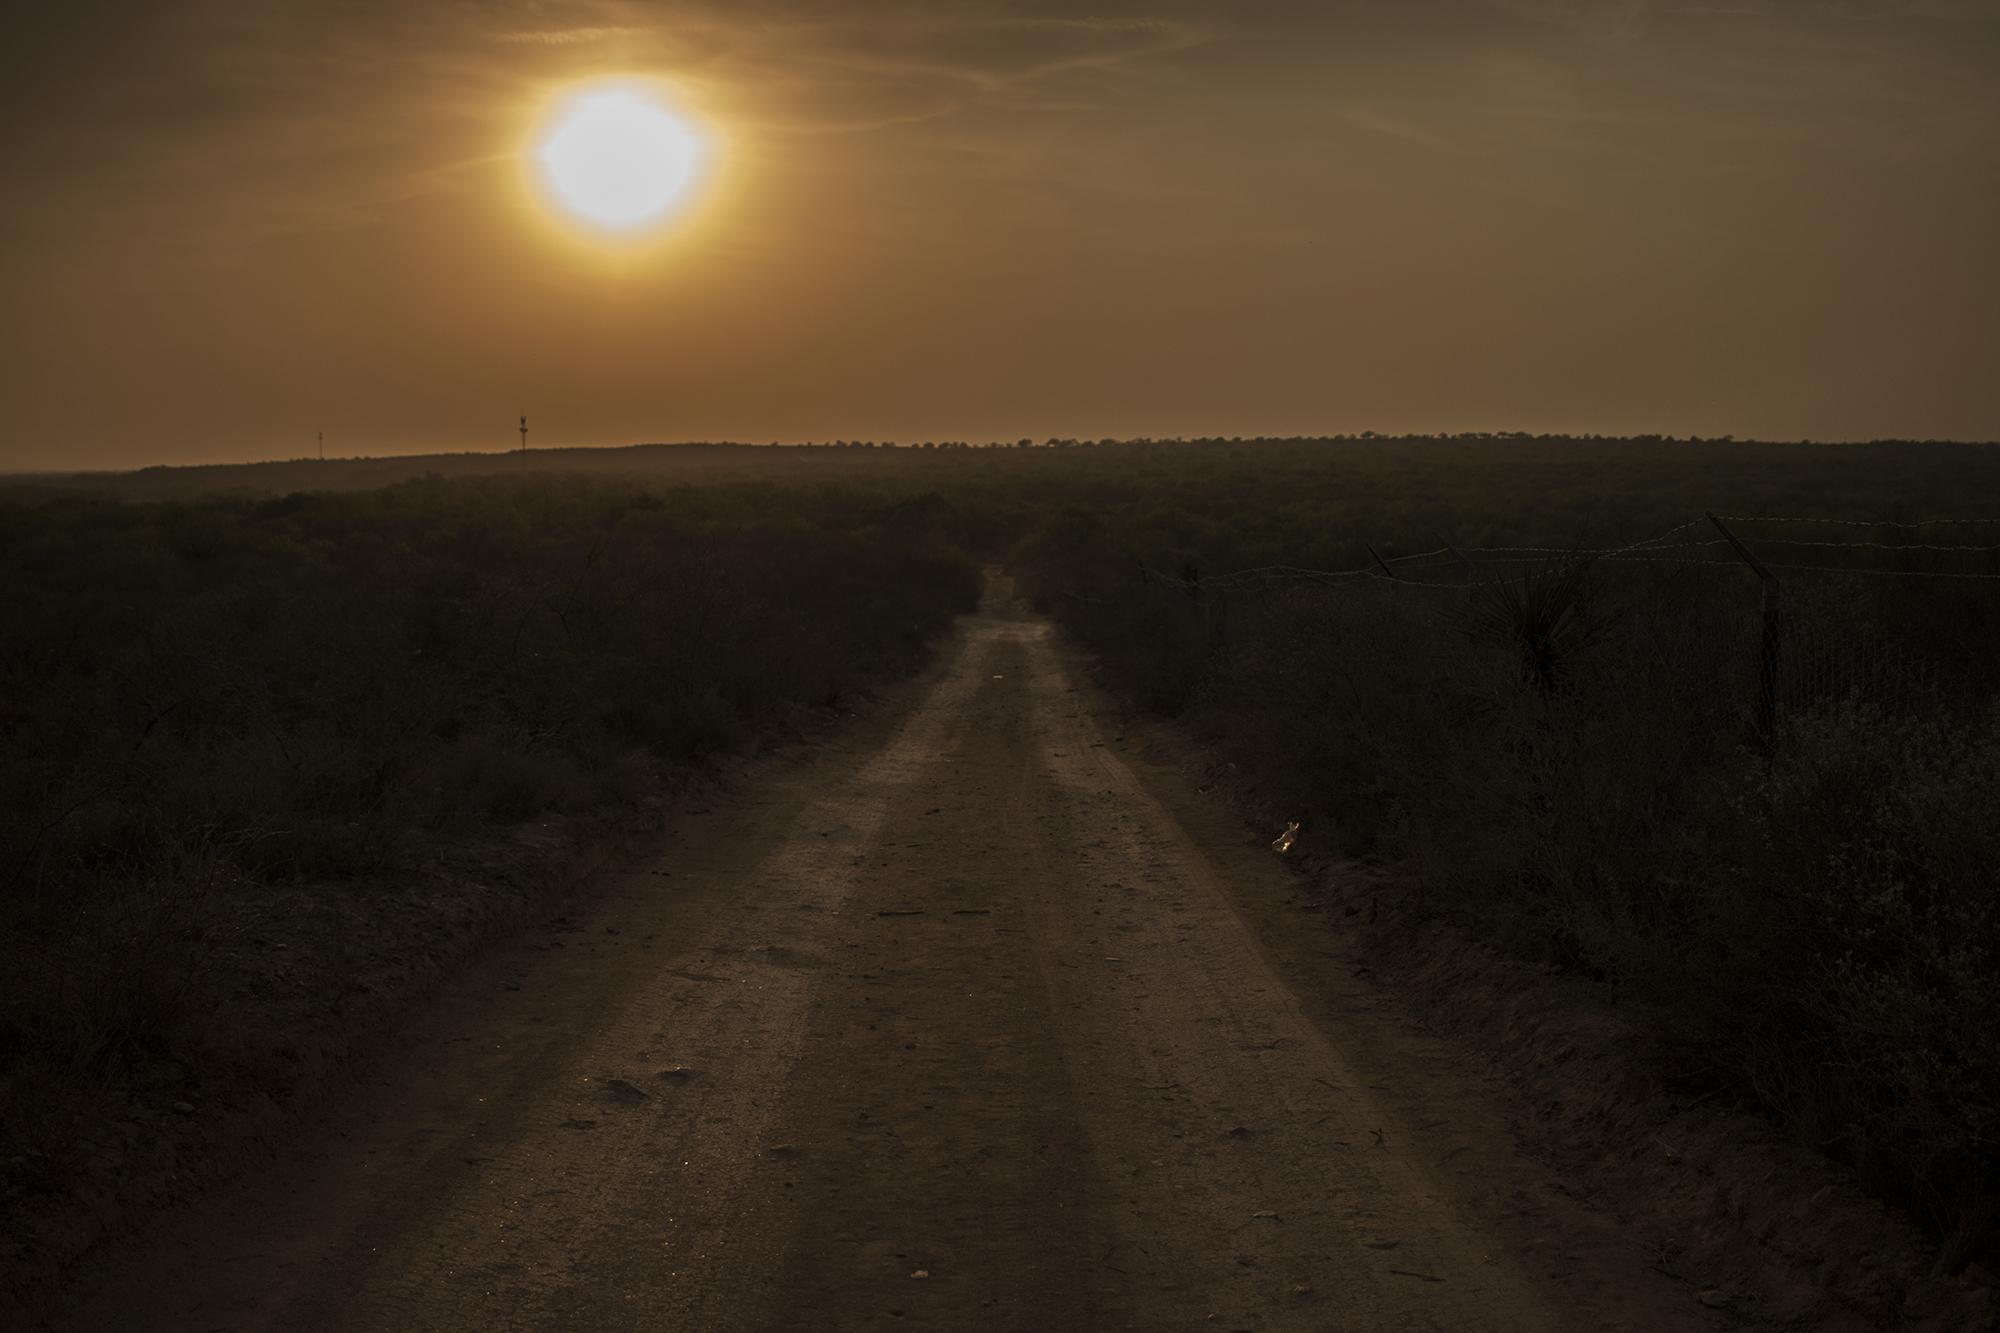 After crossing the river and landing on the northern banks of the Rio Grande, asylum seekers walk for more than a mile to reach the improvised Border Patrol stations in Roma, Texas. As night falls, animals come out and startle the walkers. One group surprised a wild boar, sending it scuttling off into the brush.